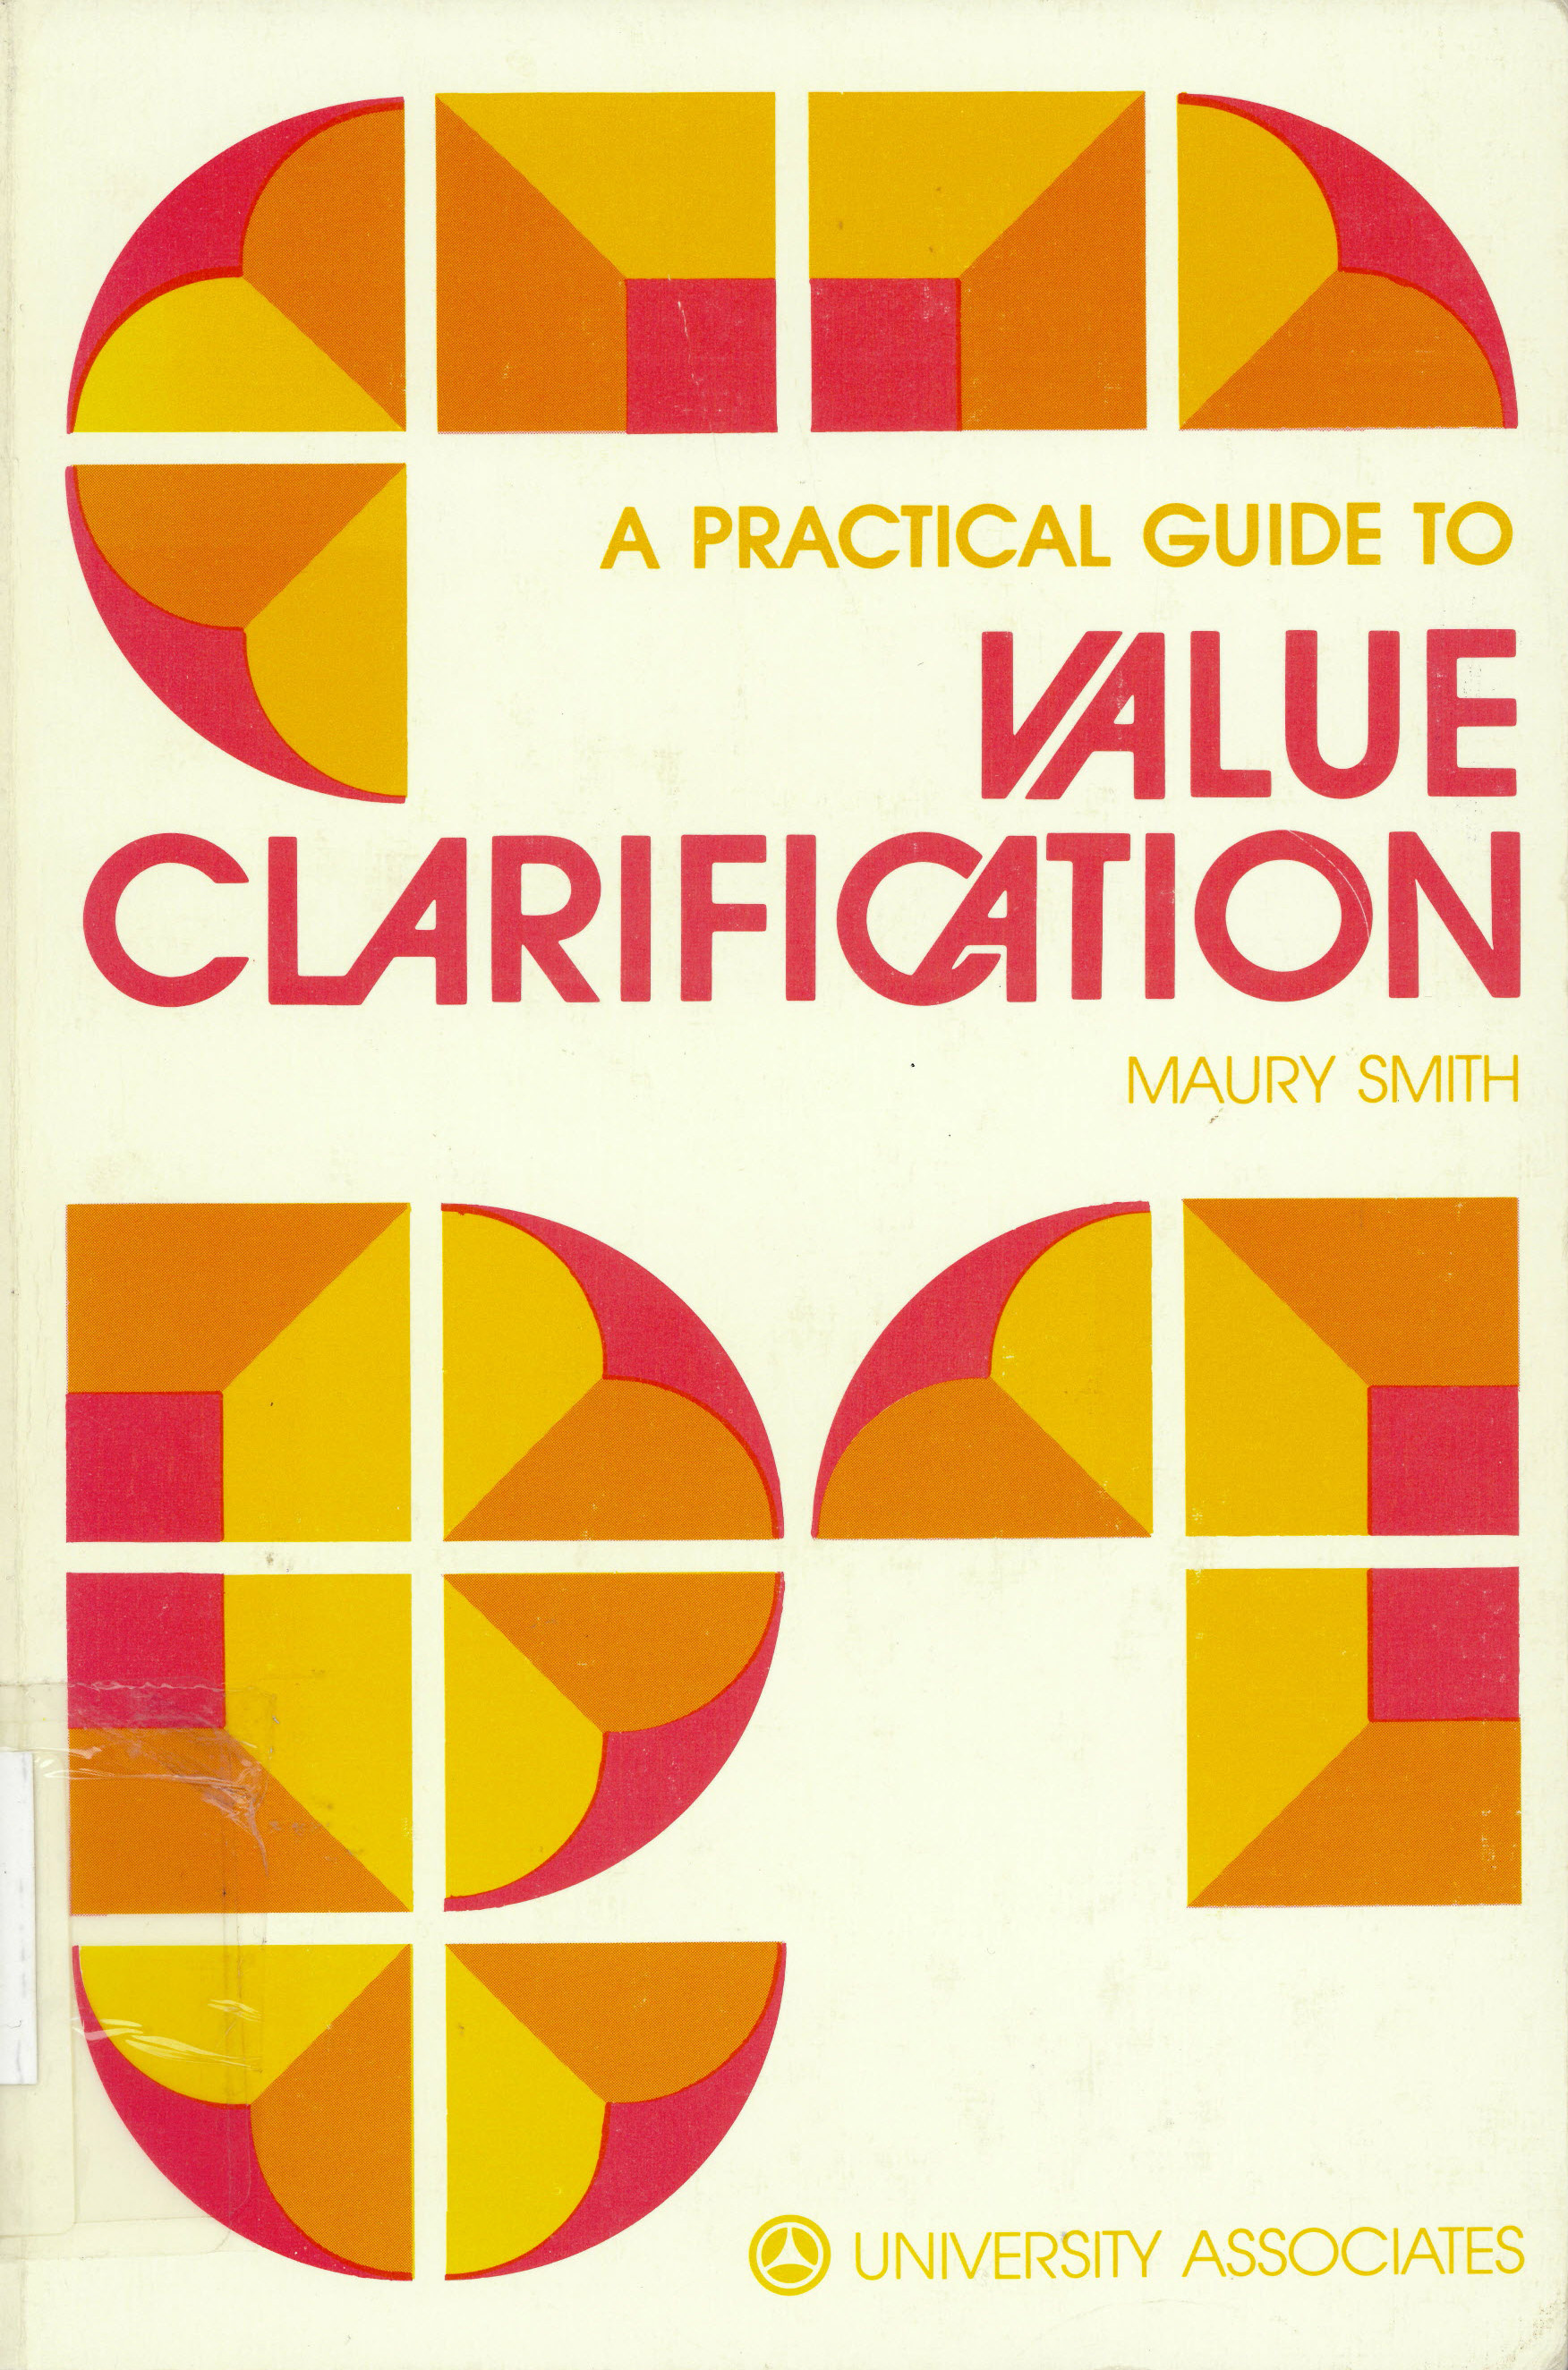 Practical guide to value clarification